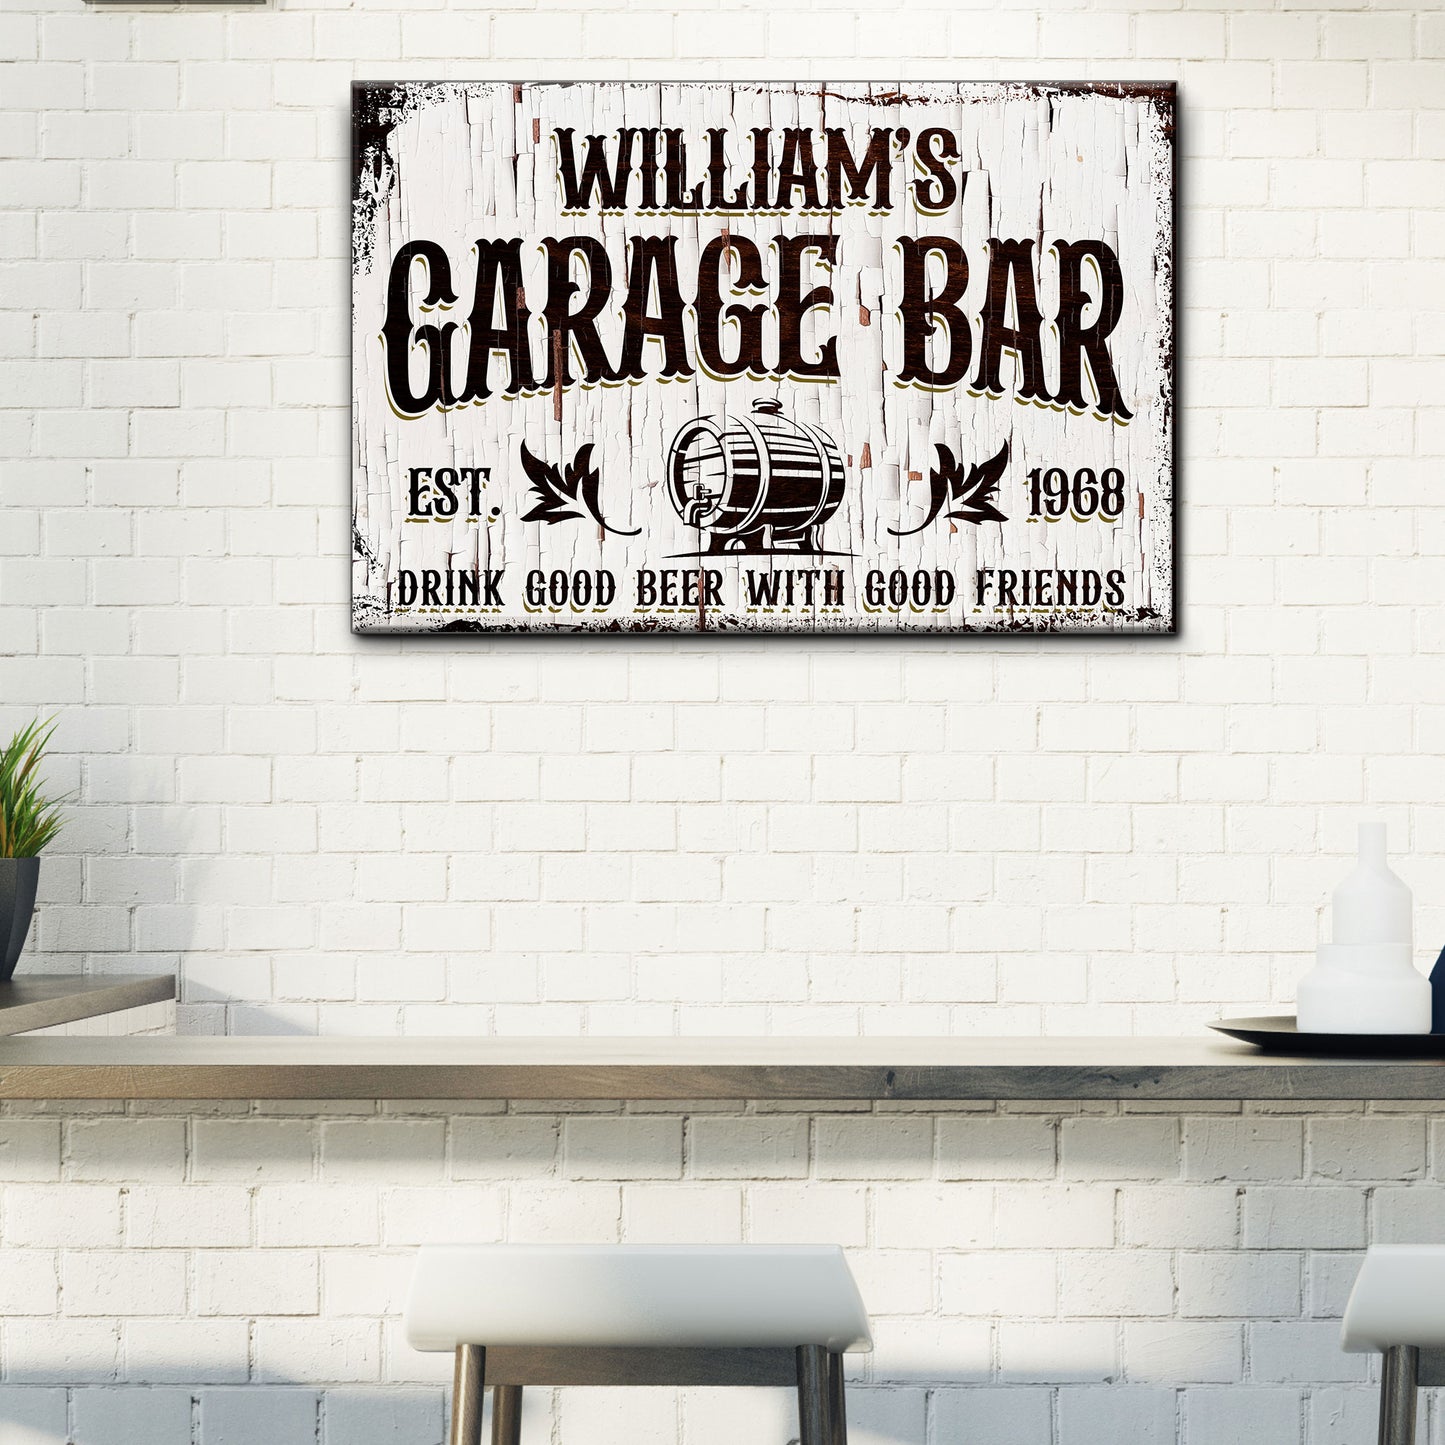 Garage Bar Rustic Wood Sign - Image by Tailored Canvases